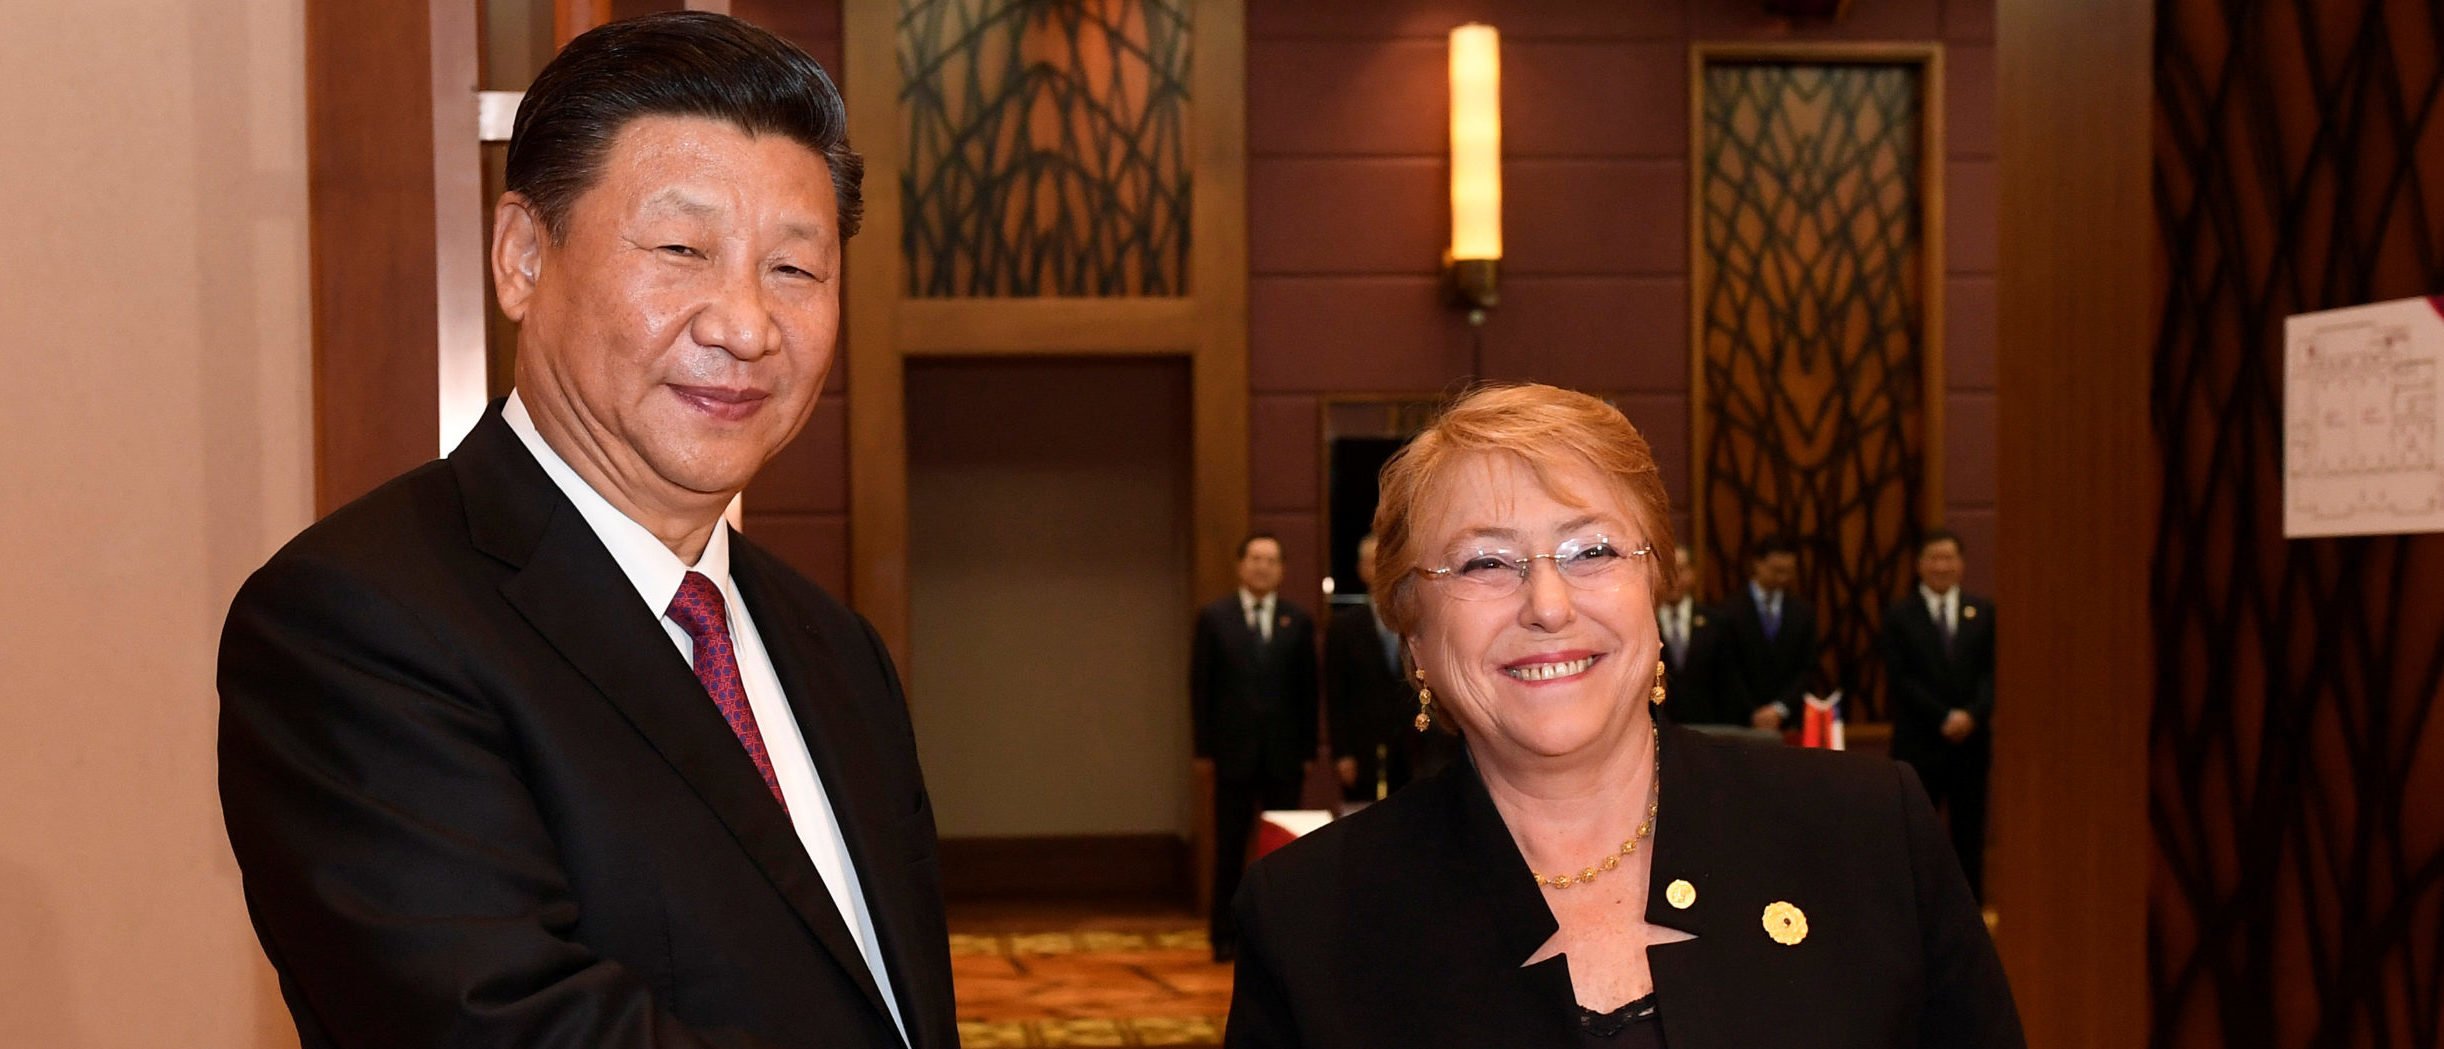 Michelle Bachelet and Xi Jinping in 2017. (Alex Ibanez/Courtesy of Chilean Presidency/Handout via Reuters)